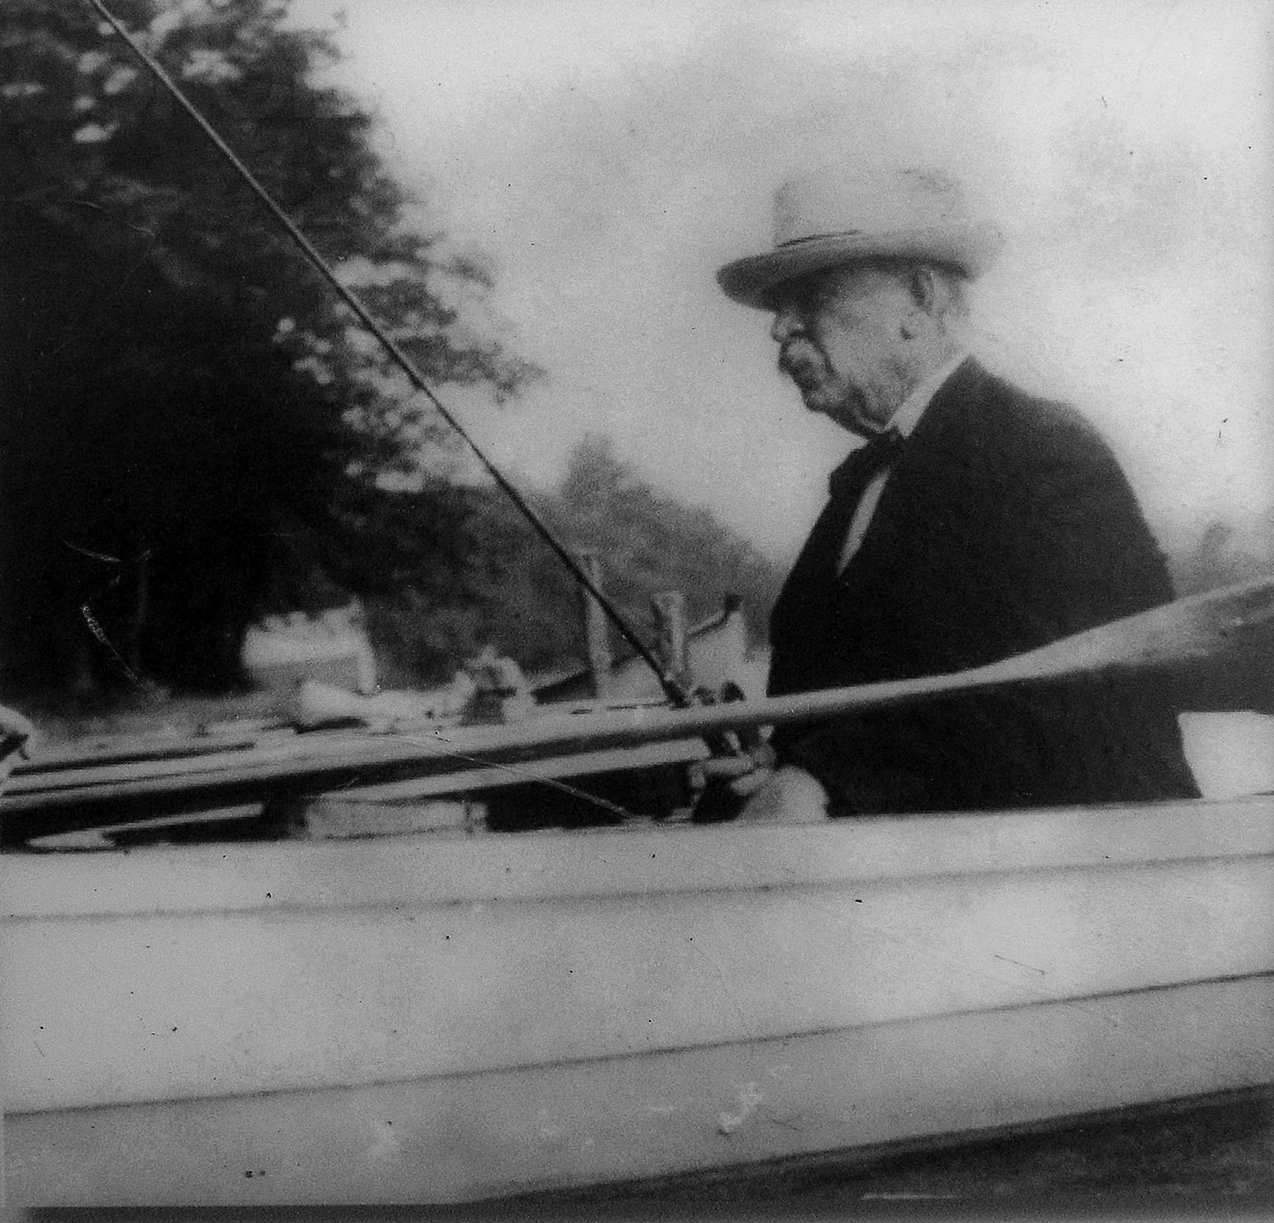 In this black and white image, a man in a suit and hat is seen sitting in a boat. He is holding a fishing rod in his hands. He looks determined as he stares ahead, his face partially visible in profile.